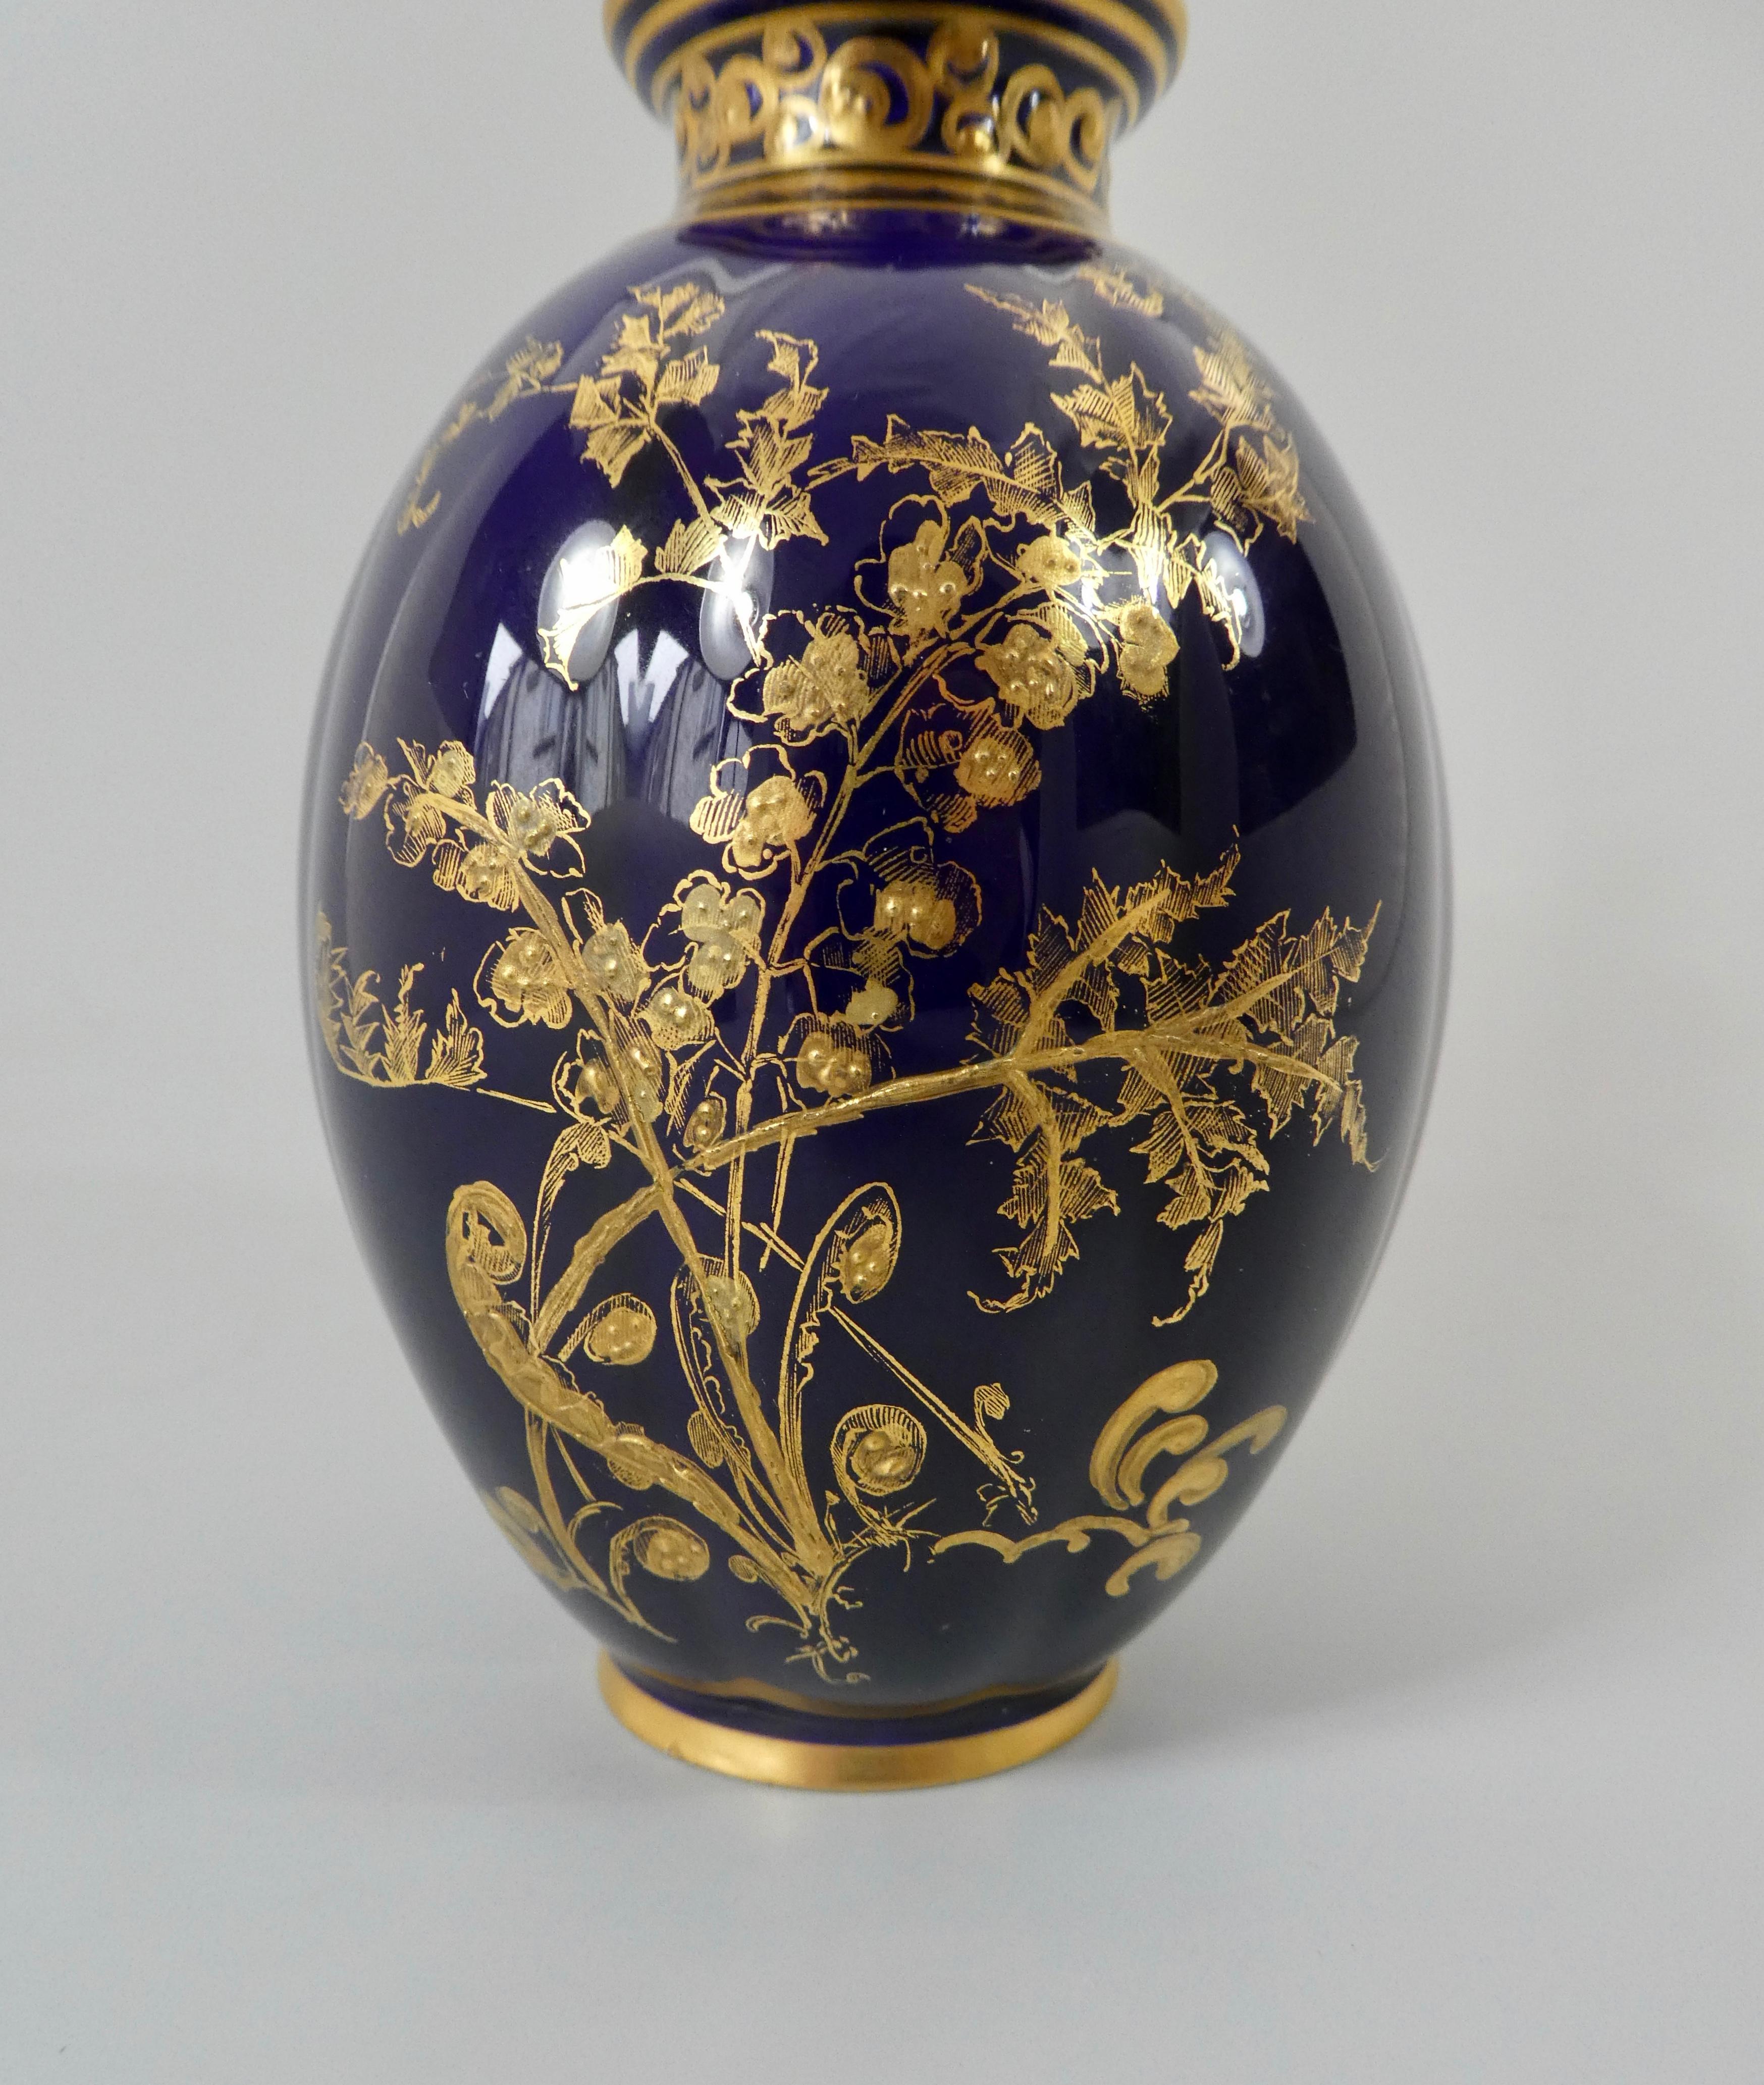 Royal Crown Derby Porcelain vase and cover, dated 1909. The melon shaped vase, finely gilded with flowering plants, on a cobalt blue ground. The cover moulded and gilded scrolling vine, beneath a gilt acorn finial.
Printed marks, and date code for